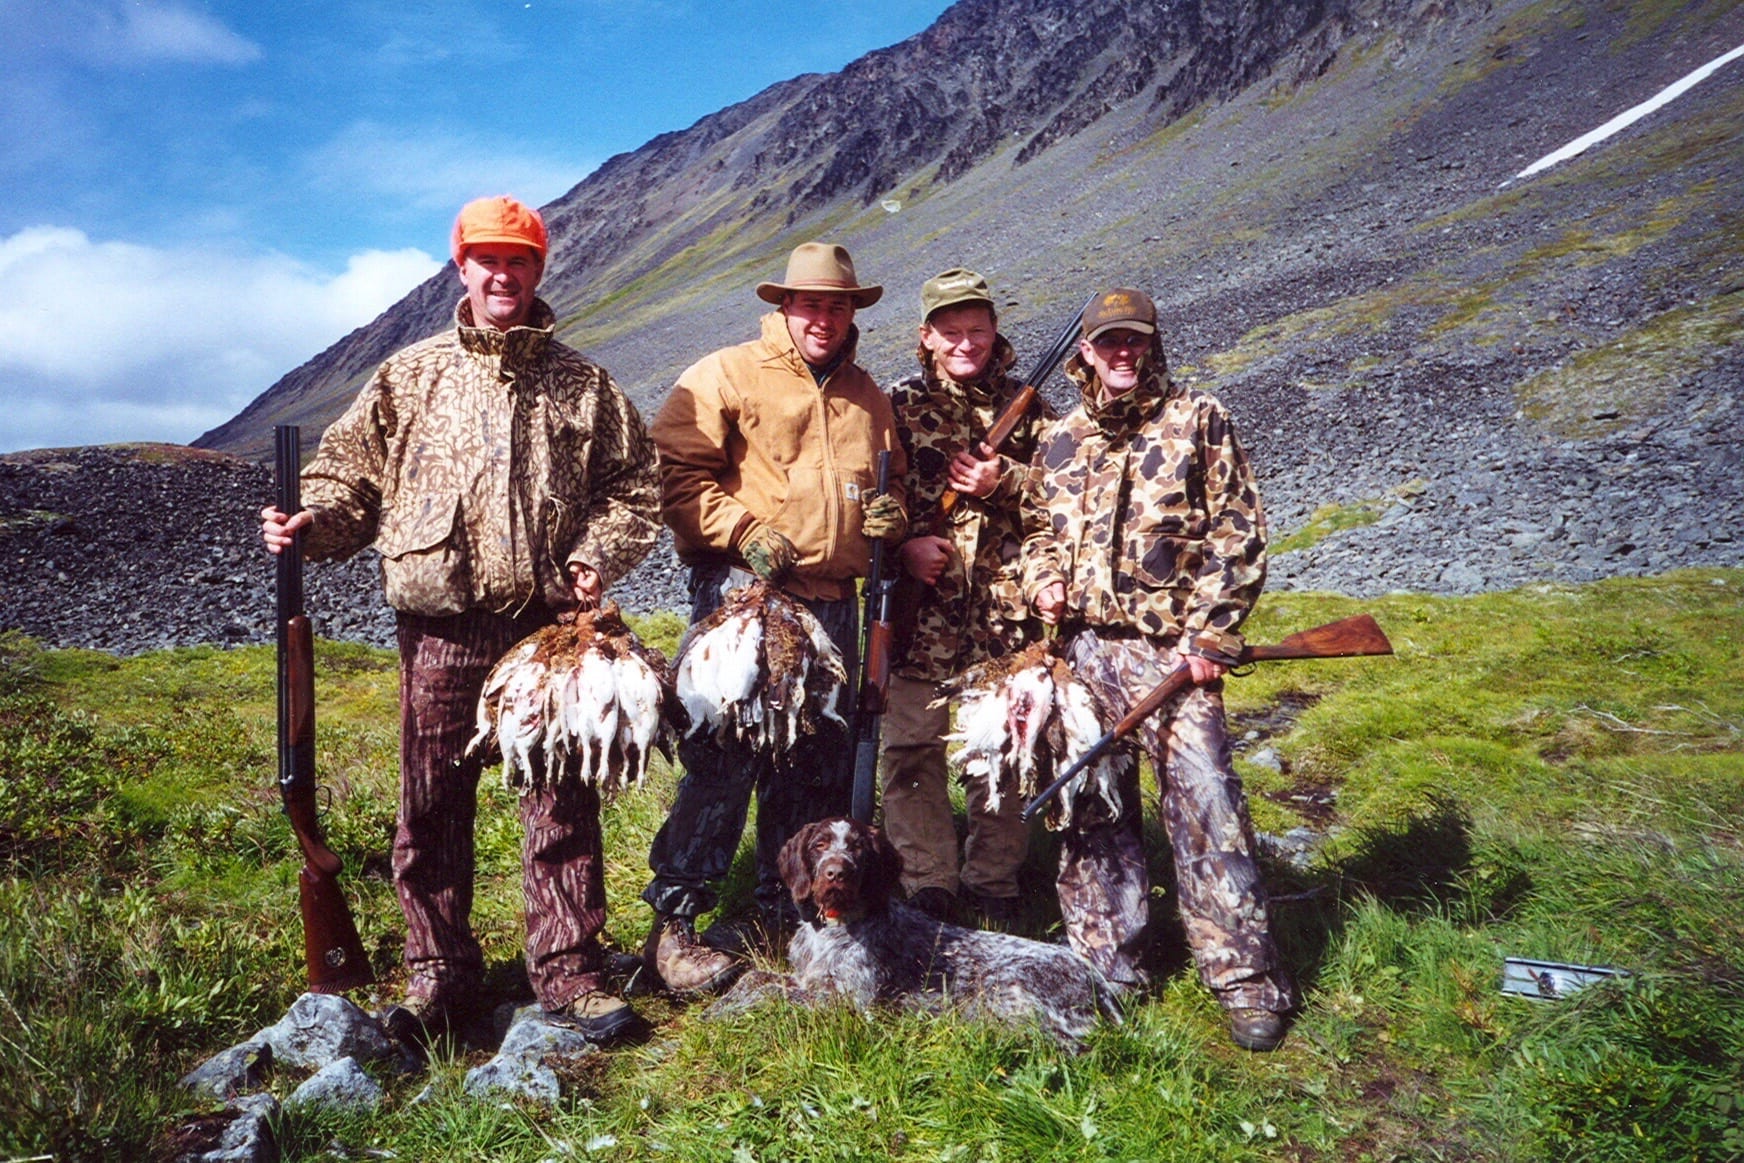 A group of people holding game they hunted